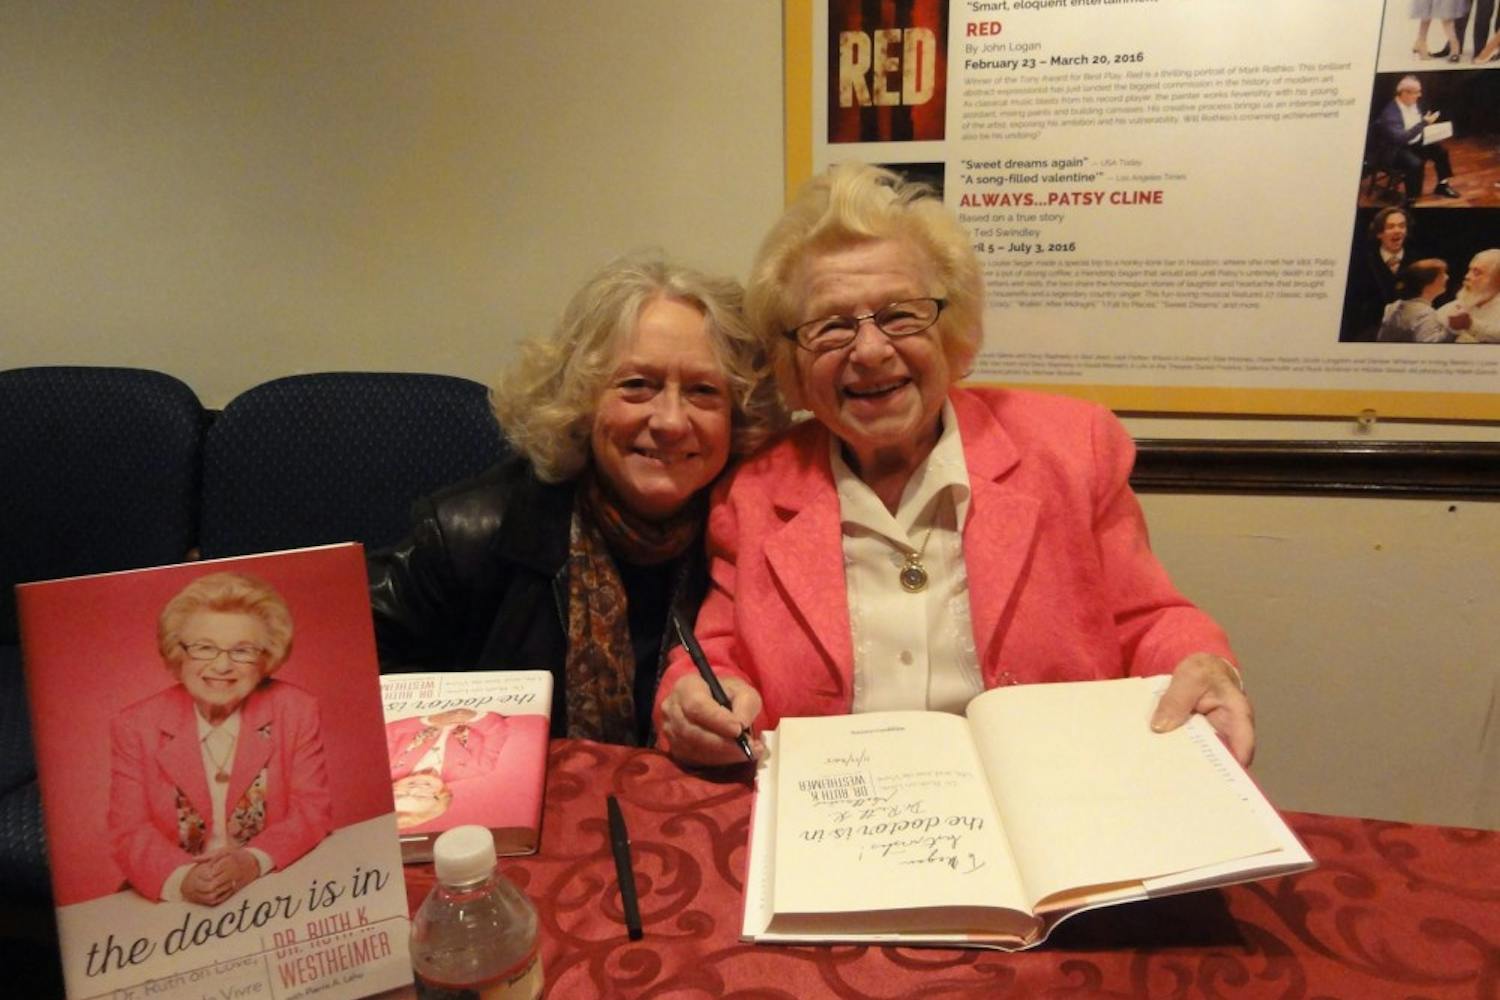 Dr. Ruth Westheimer poses with Jane Ridley&nbsp;at the signing of her book, "The Doctor Is In." 